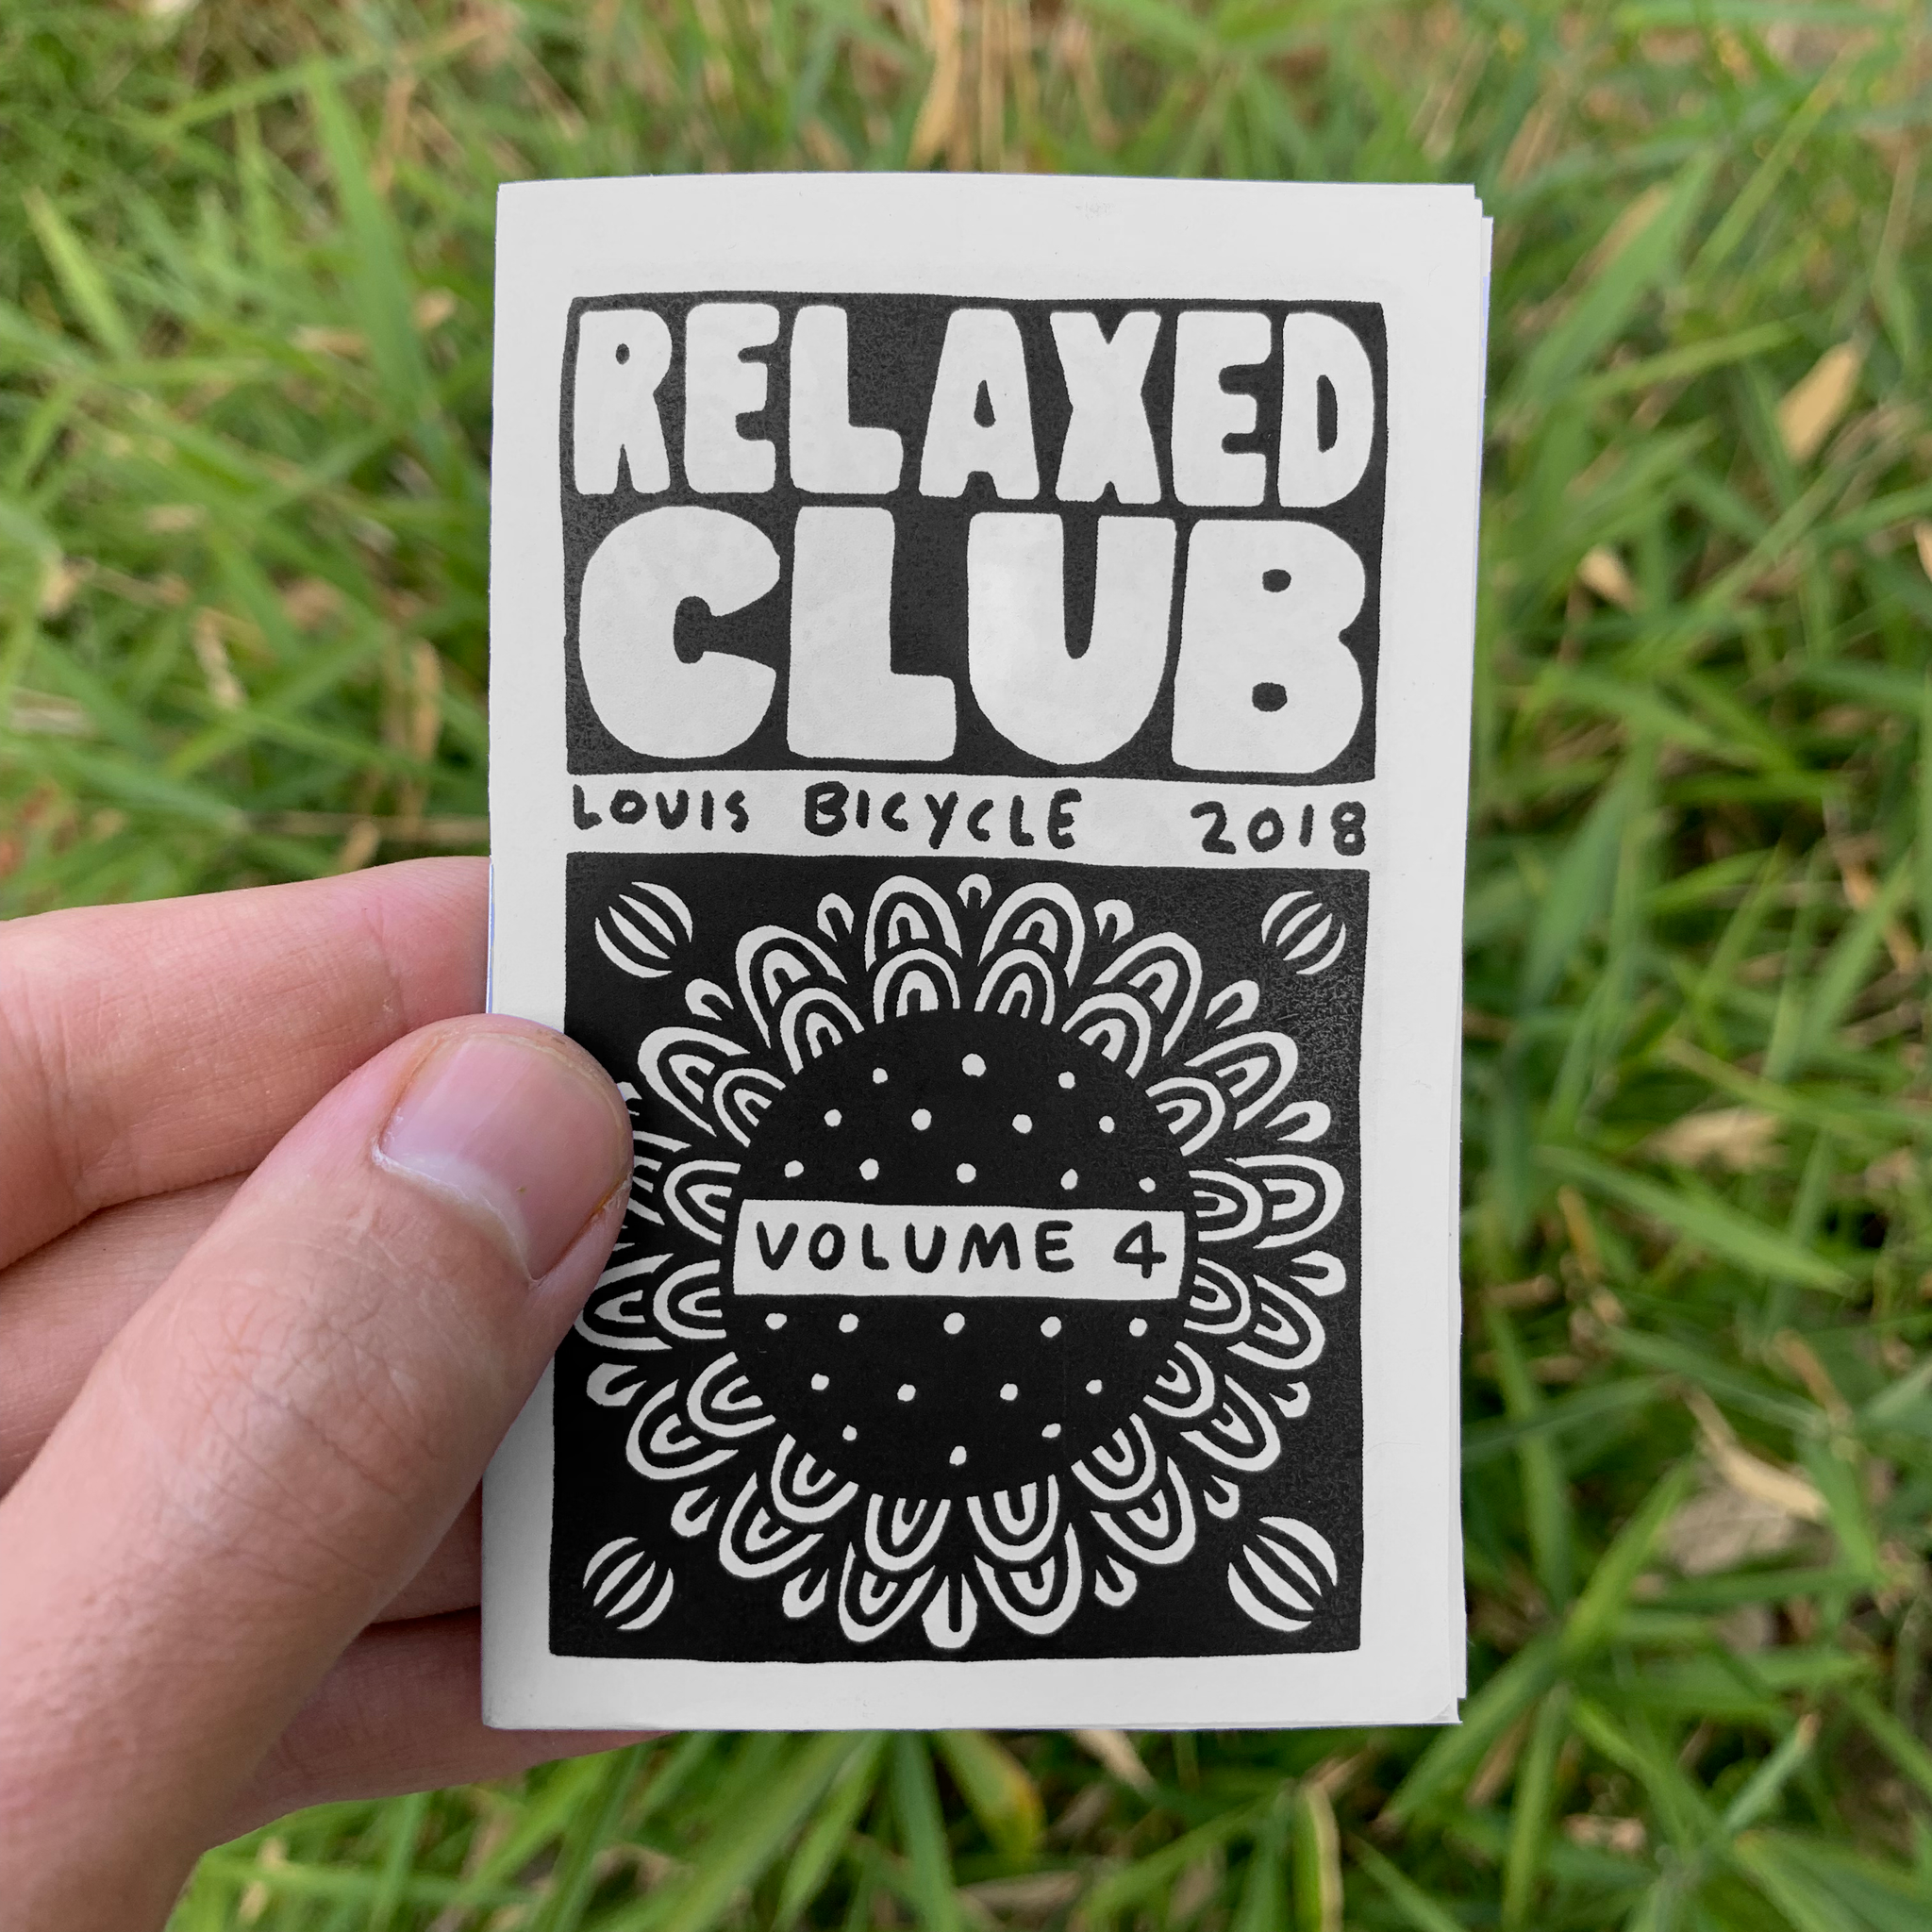 Relaxed Club Zine - Volume 4 - 2018